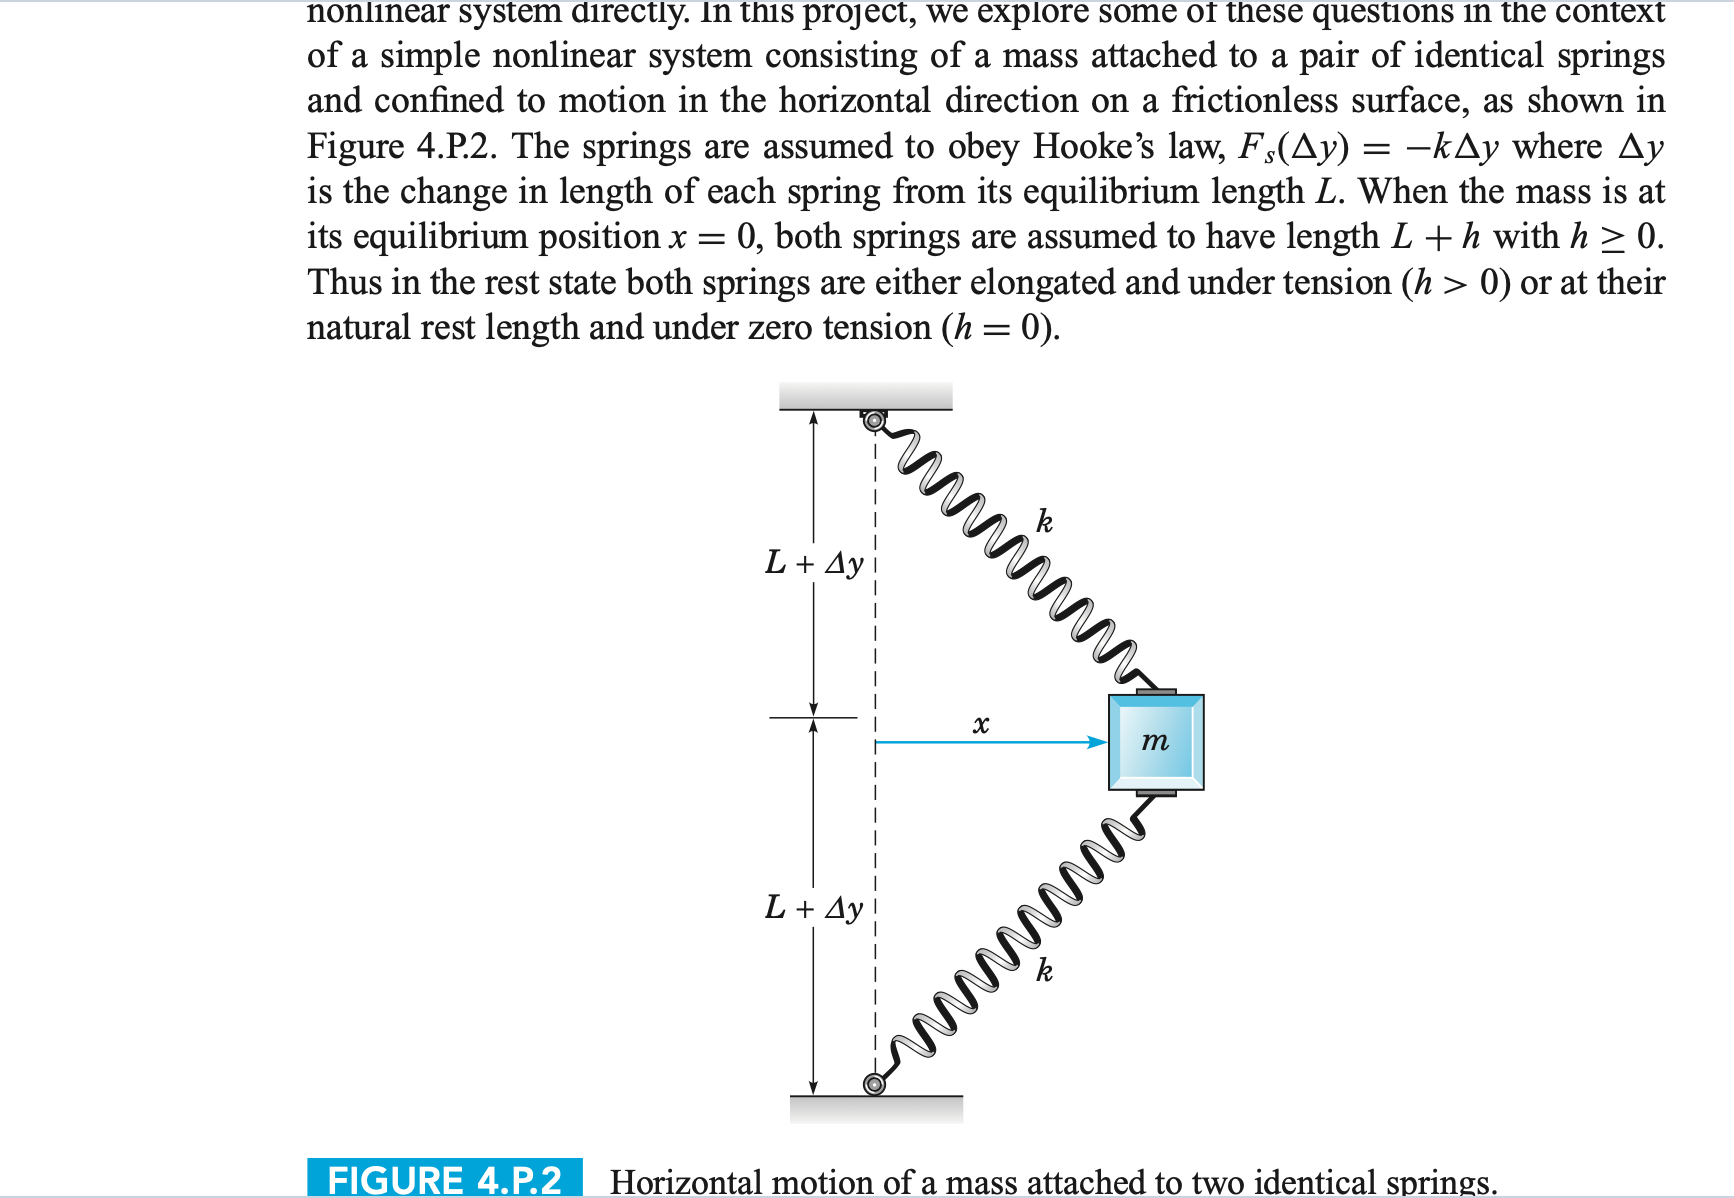 nonlinear system directly. In this project, we explore some of these questions in the context
of a simple nonlinear system consisting of a mass attached to a pair of identical springs
and confined to motion in the horizontal direction on a frictionless surface, as shown in
Figure 4.P.2. The springs are assumed to obey Hooke's law, F,(Ay) = -kAy where Ay
is the change in length of each spring from its equilibrium length L. When the mass is at
its equilibrium position x =
Thus in the rest state both springs are either elongated and under tension (h > 0) or at their
natural rest length and under zero tension (h = 0).
%3|
0, both springs are assumed to have length L +h with h > 0.
х
т
L+ Ay
FIGURE 4.P..2
Horizontal motion of a mass attached to two identical springs.
